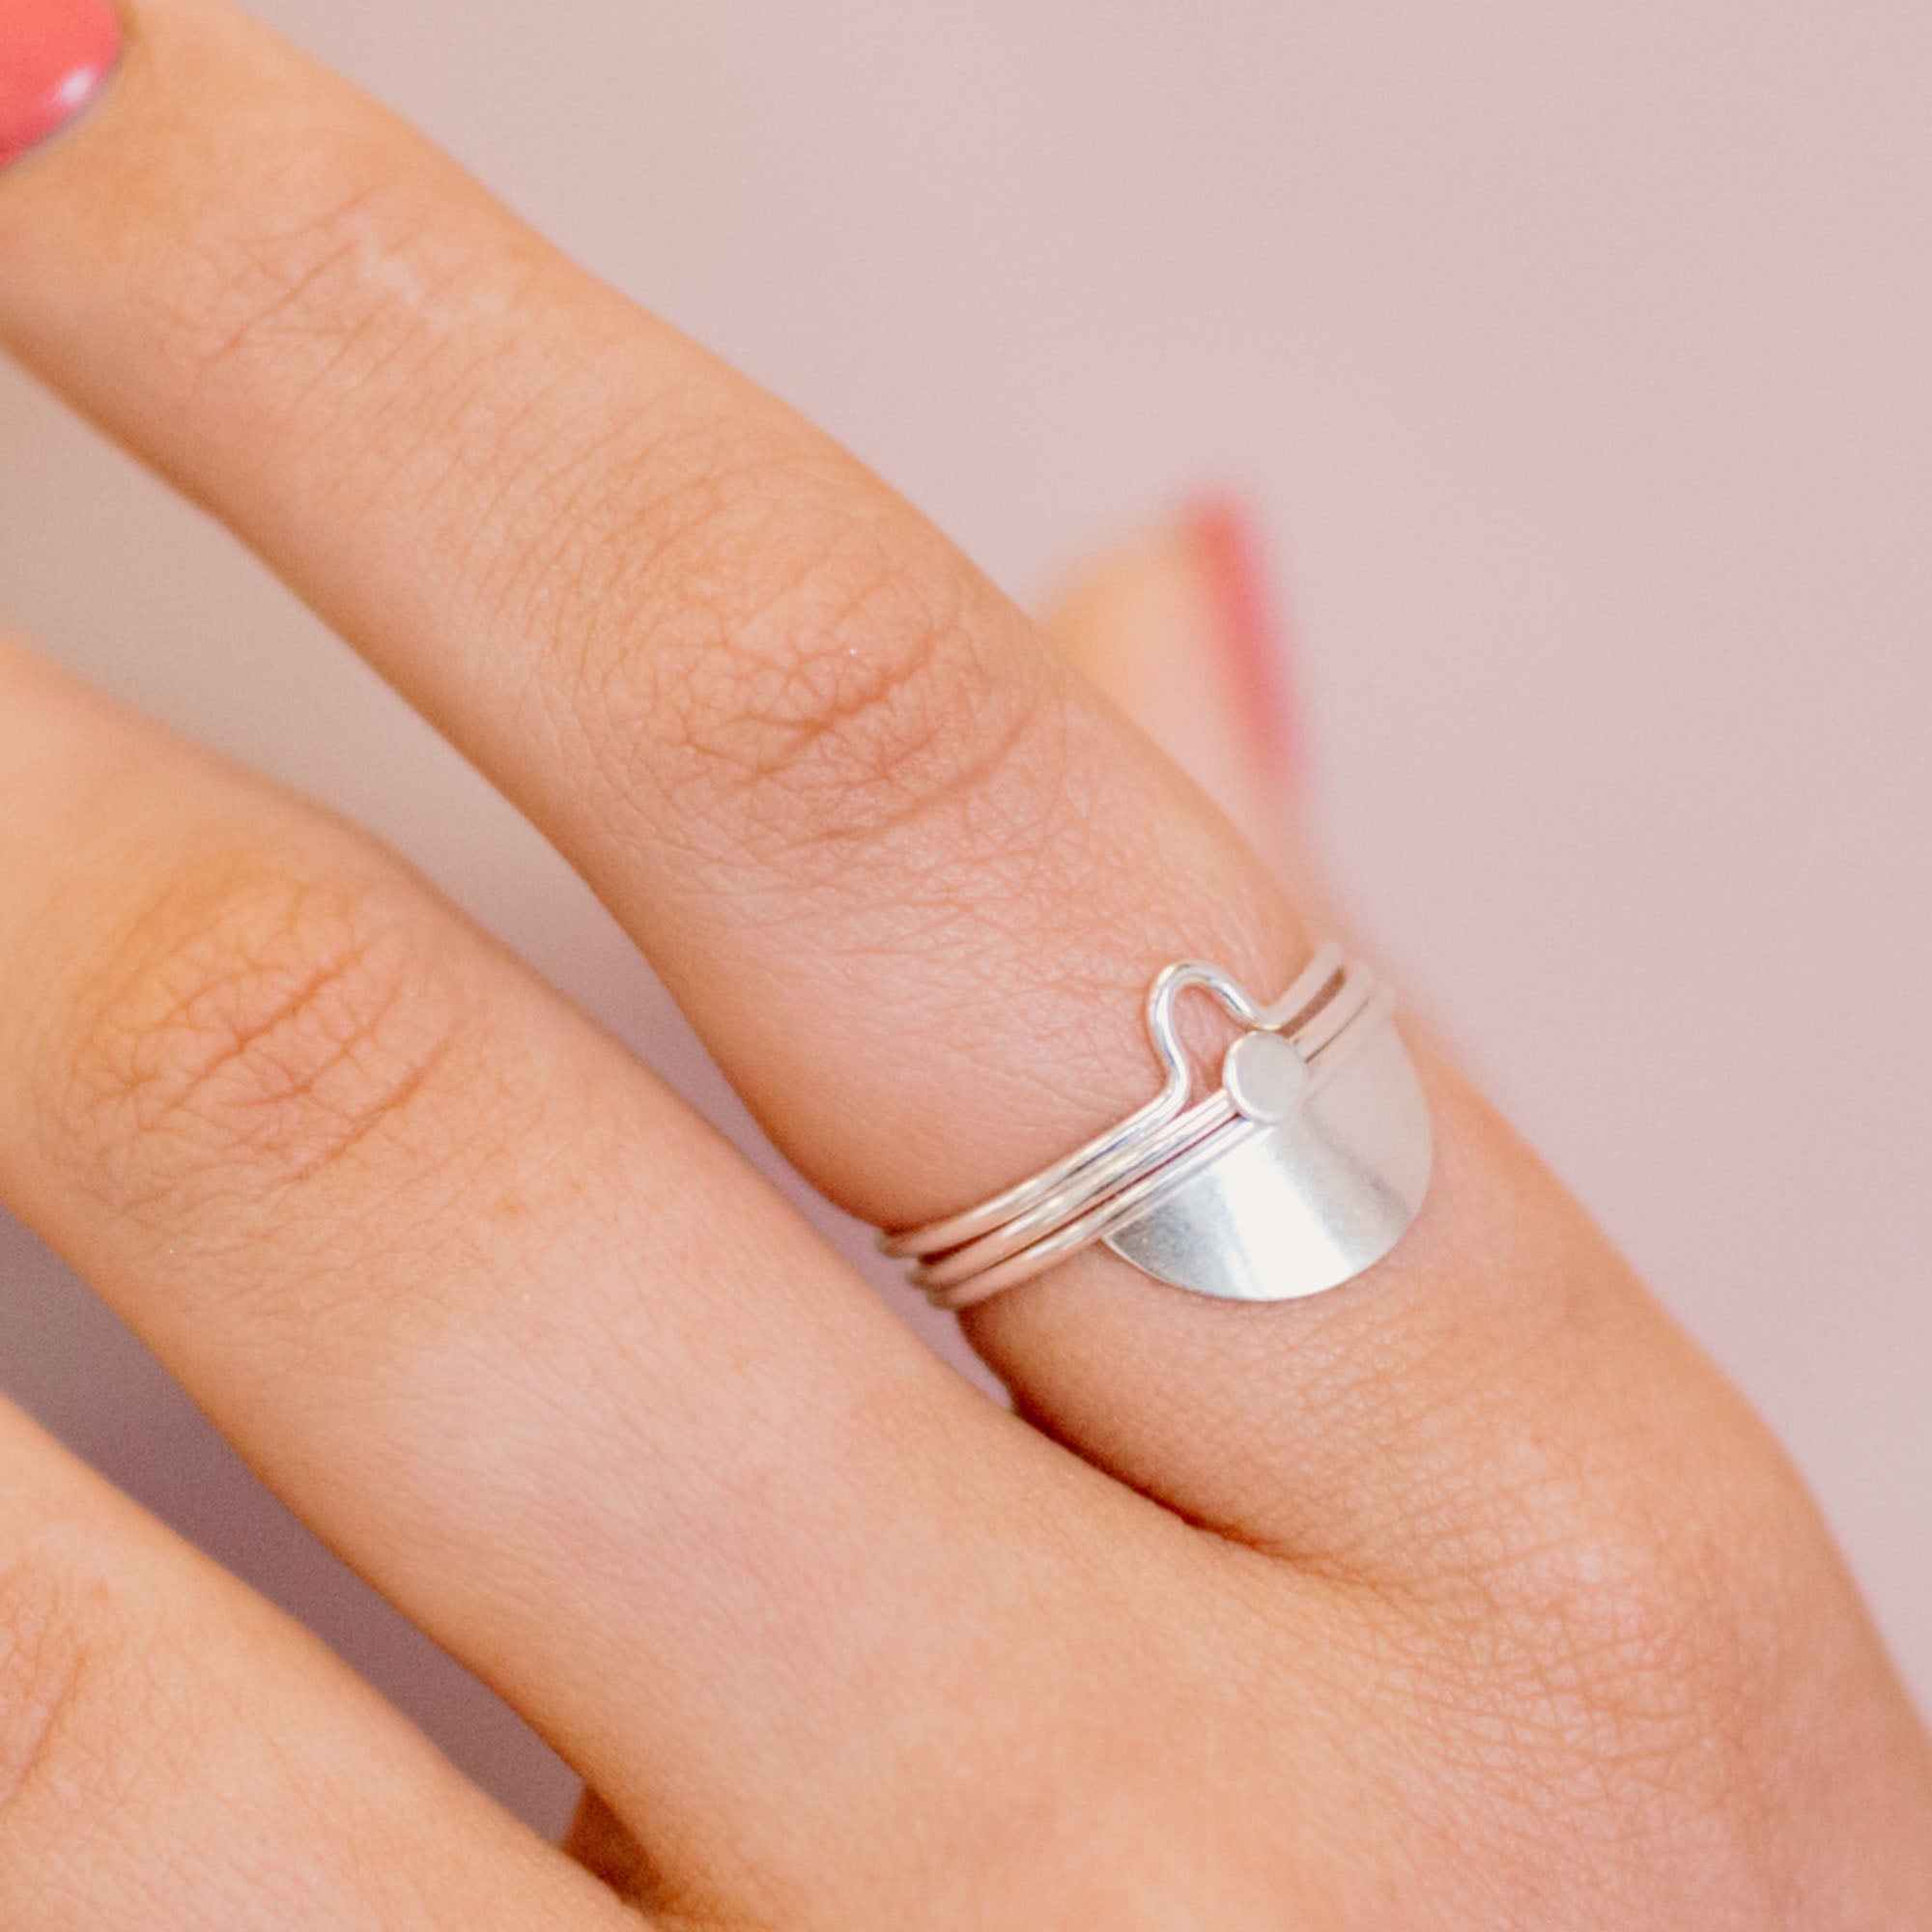 Semicircle Fragment Stacking Ring - Favor Jewelry